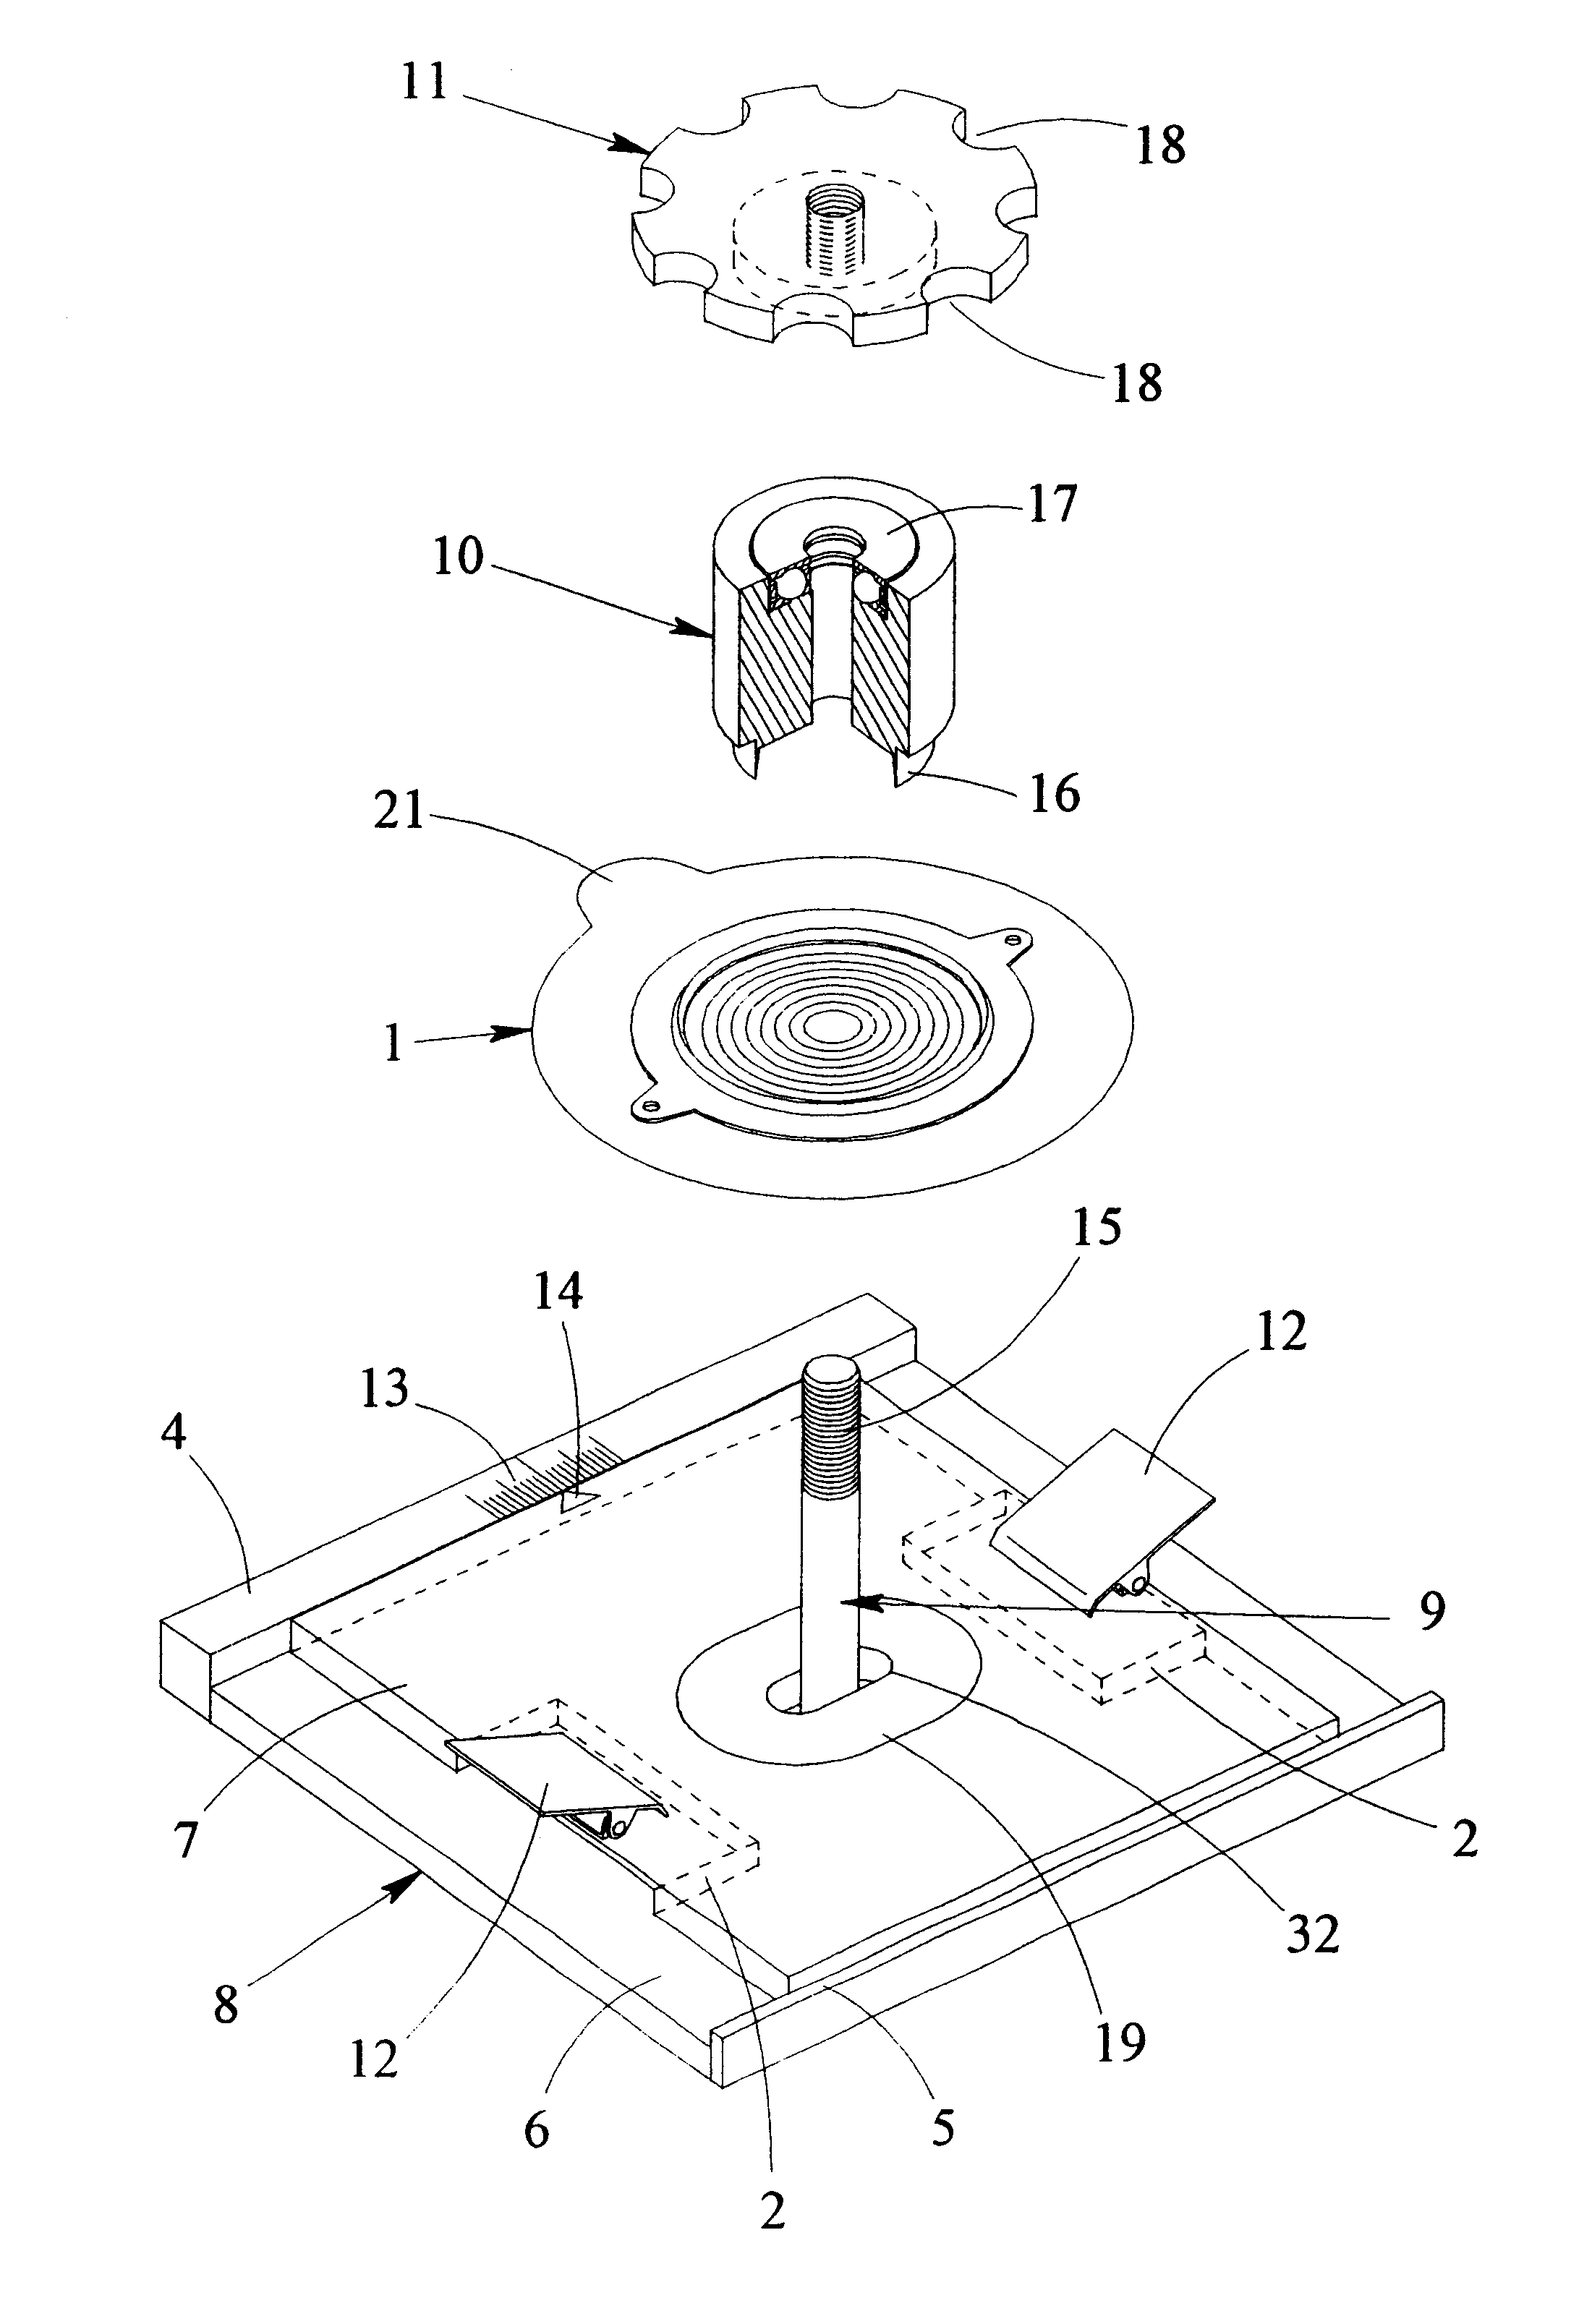 Apparatus for boring stoma wafers